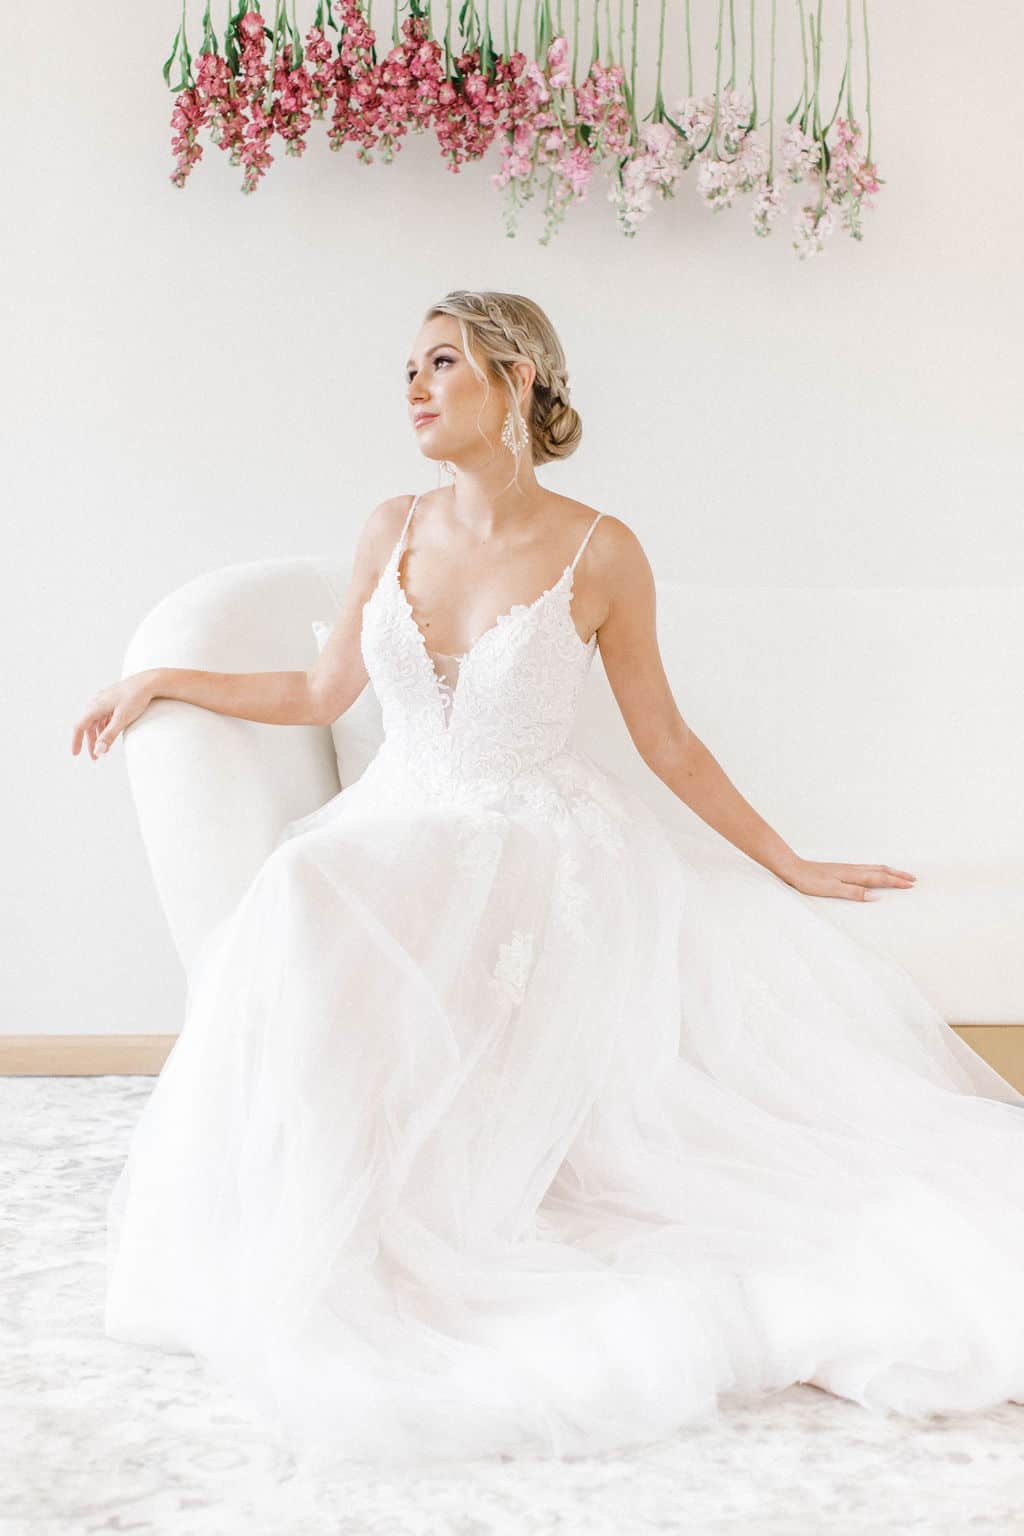 What's Better: Buying or Renting a Wedding Dress? – MyDressbox NZ